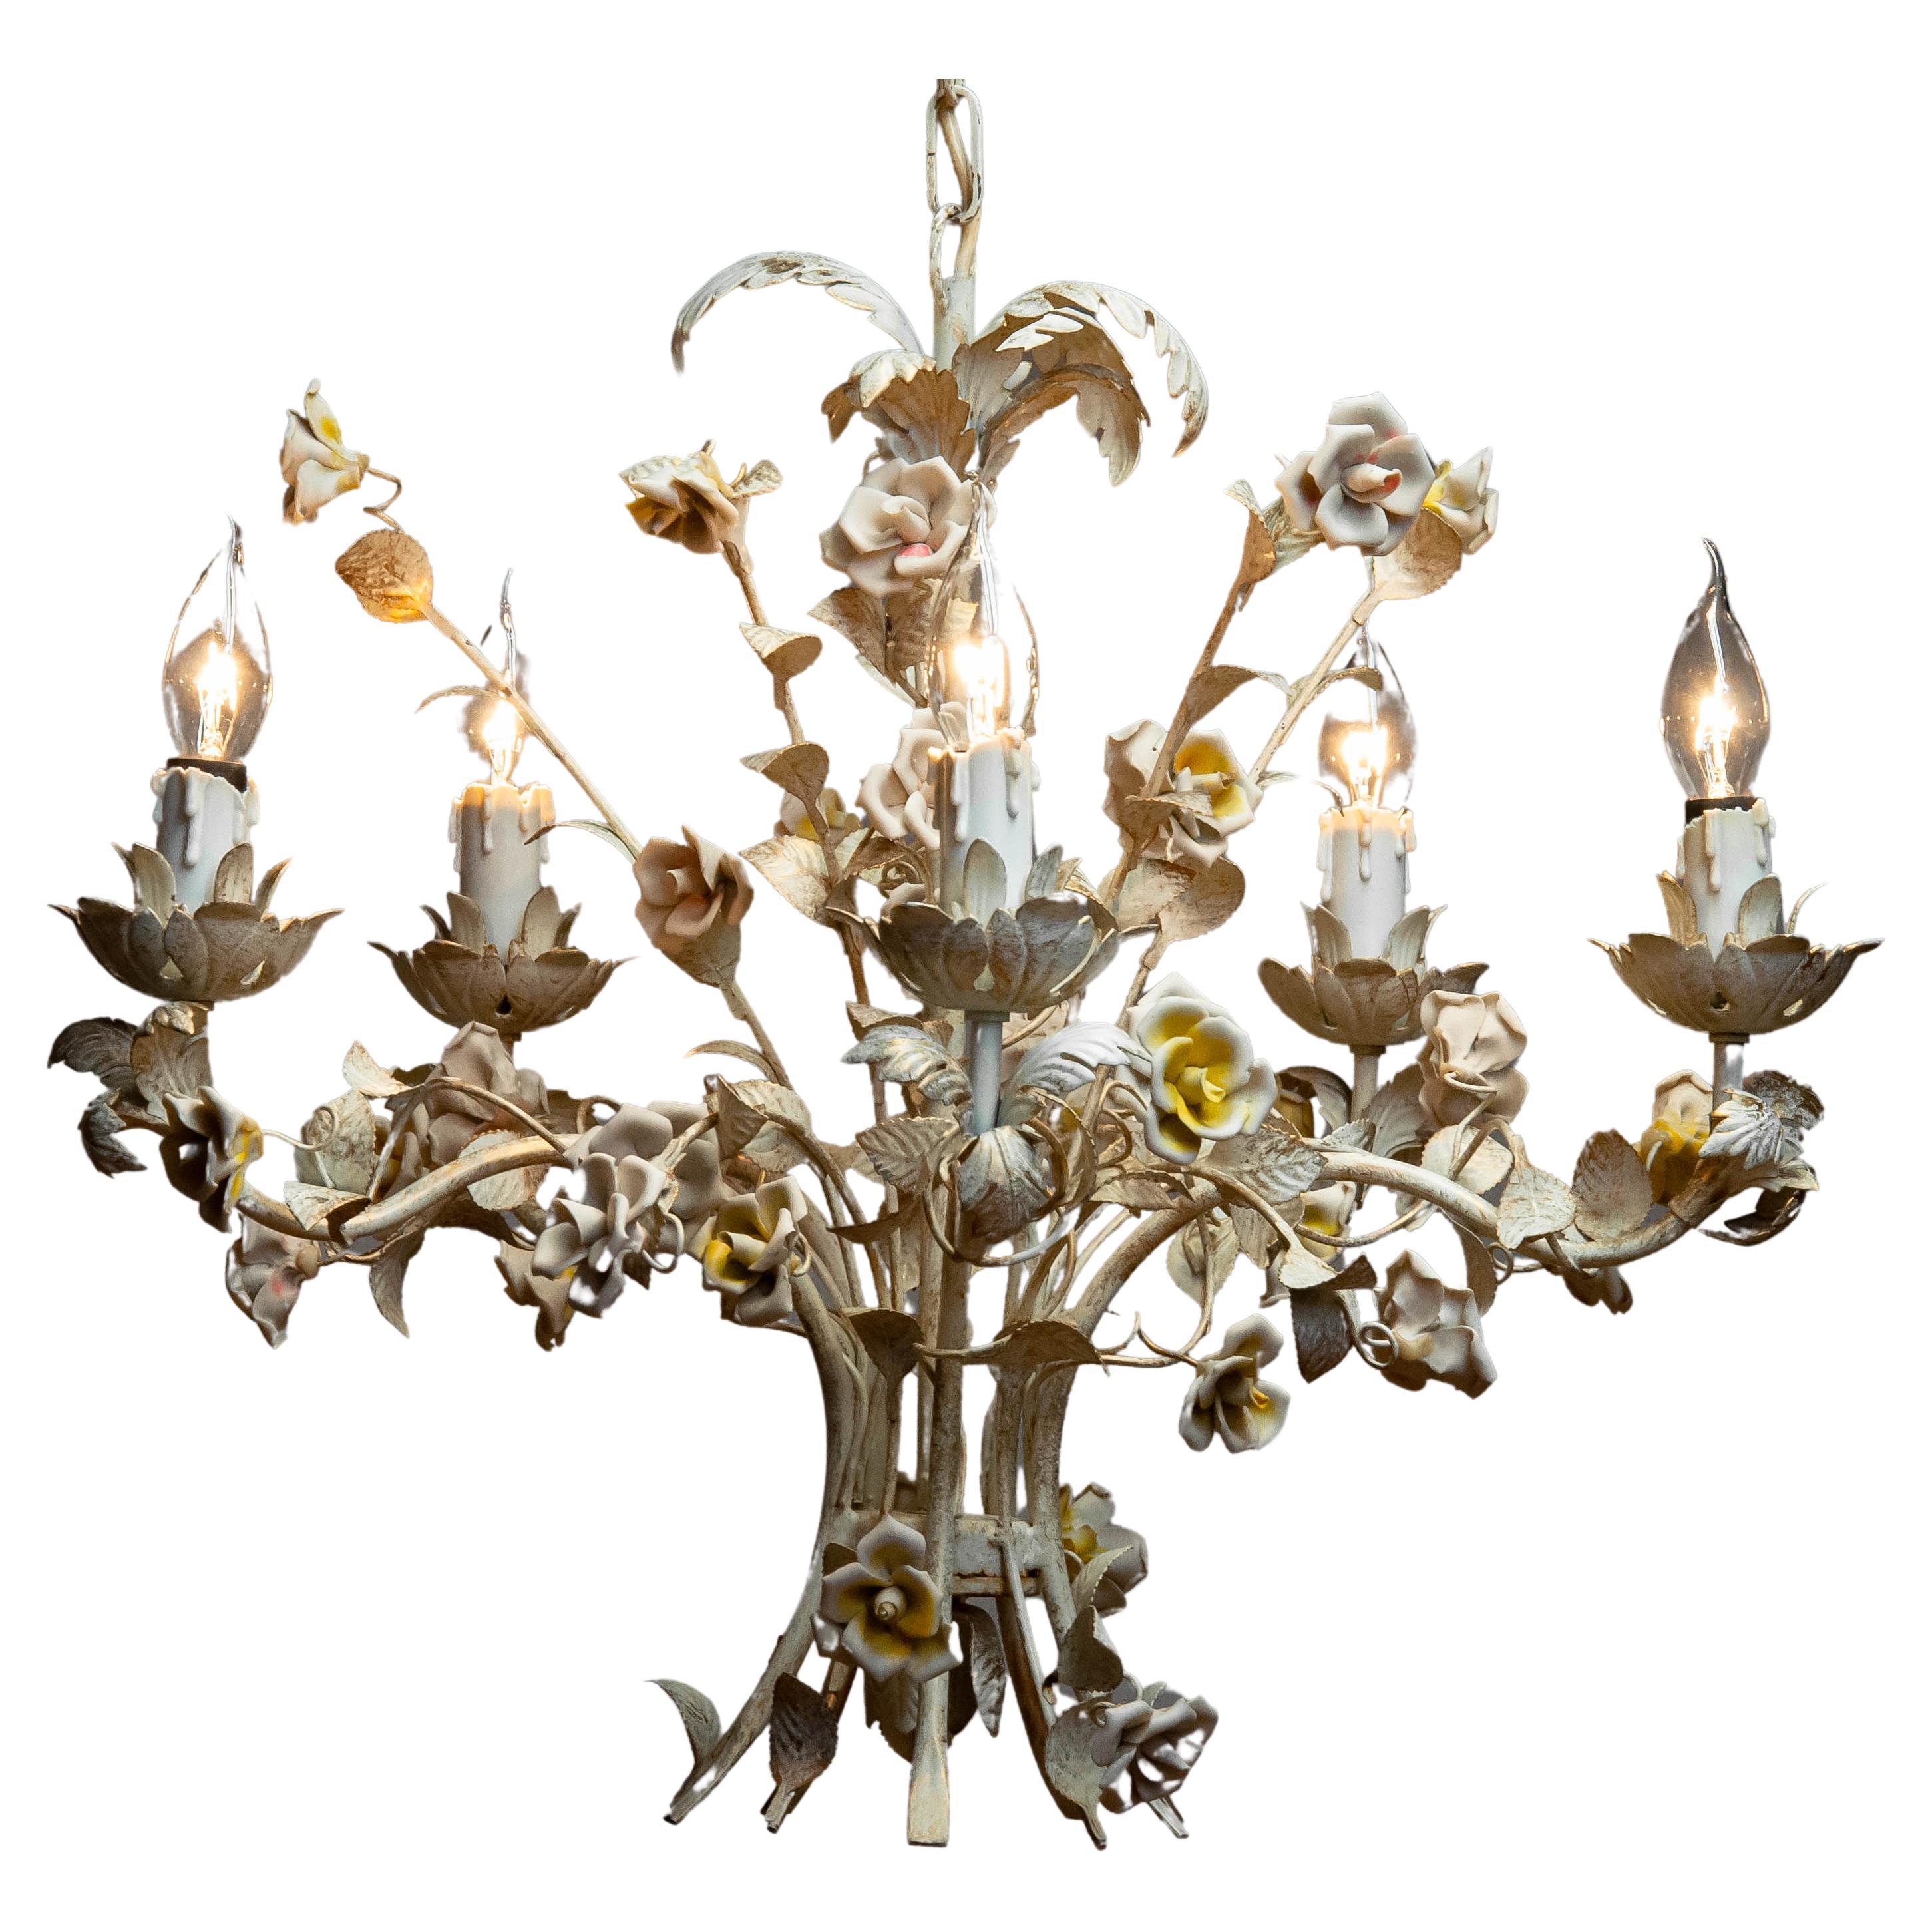 1960s Boho Chic Italian Pastel Color Painted Metal Chandelier With Floral Decor